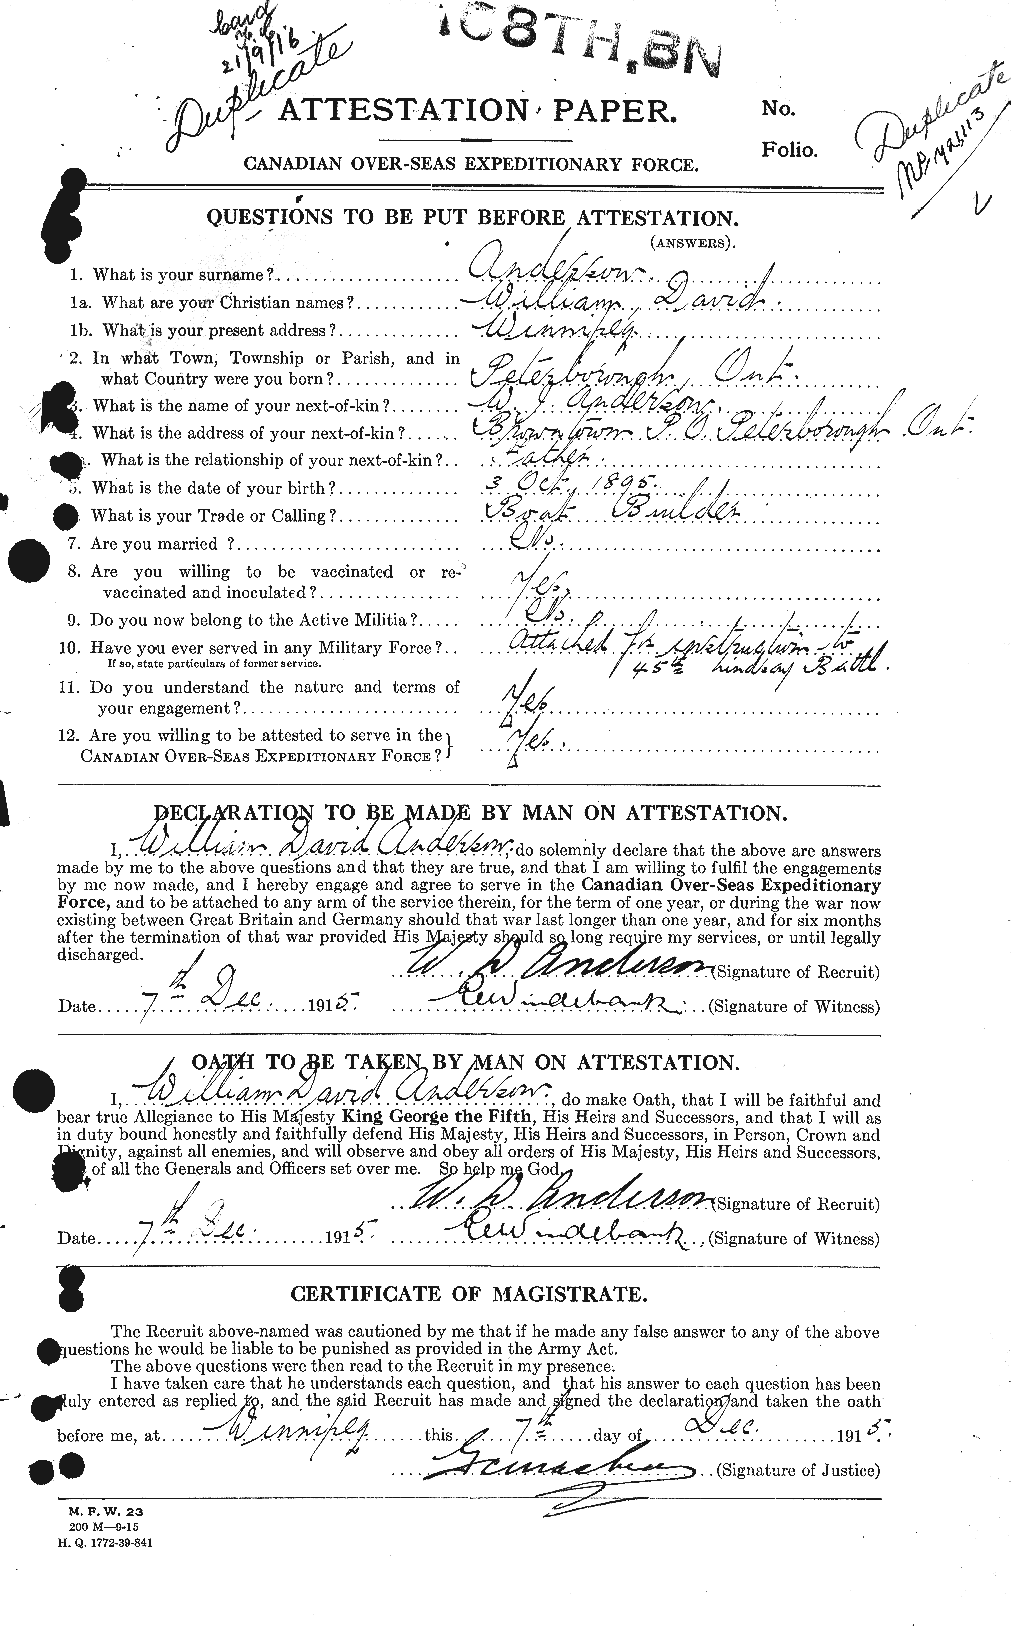 Personnel Records of the First World War - CEF 210788a